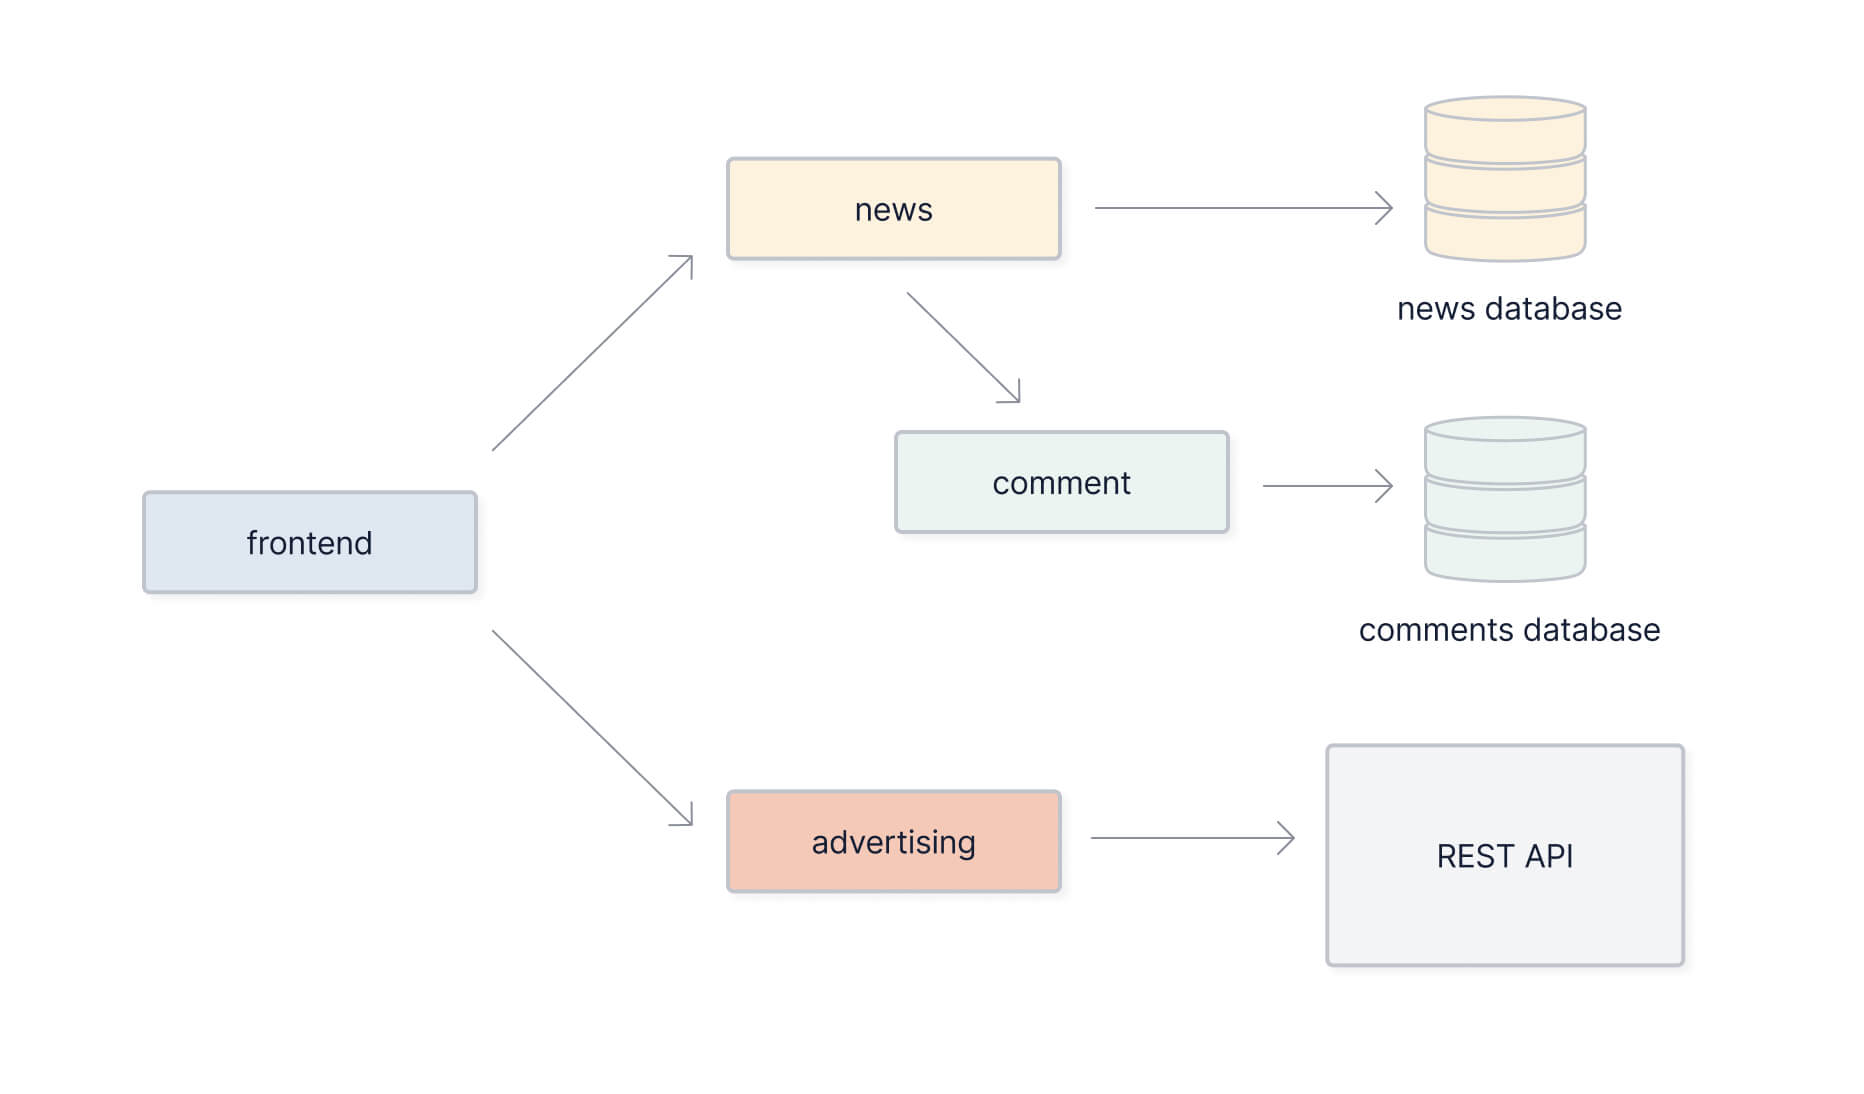 An architecture diagram for an example newsite made up of four microservices: a frontend service, a news service, a comment service and an advertising service.